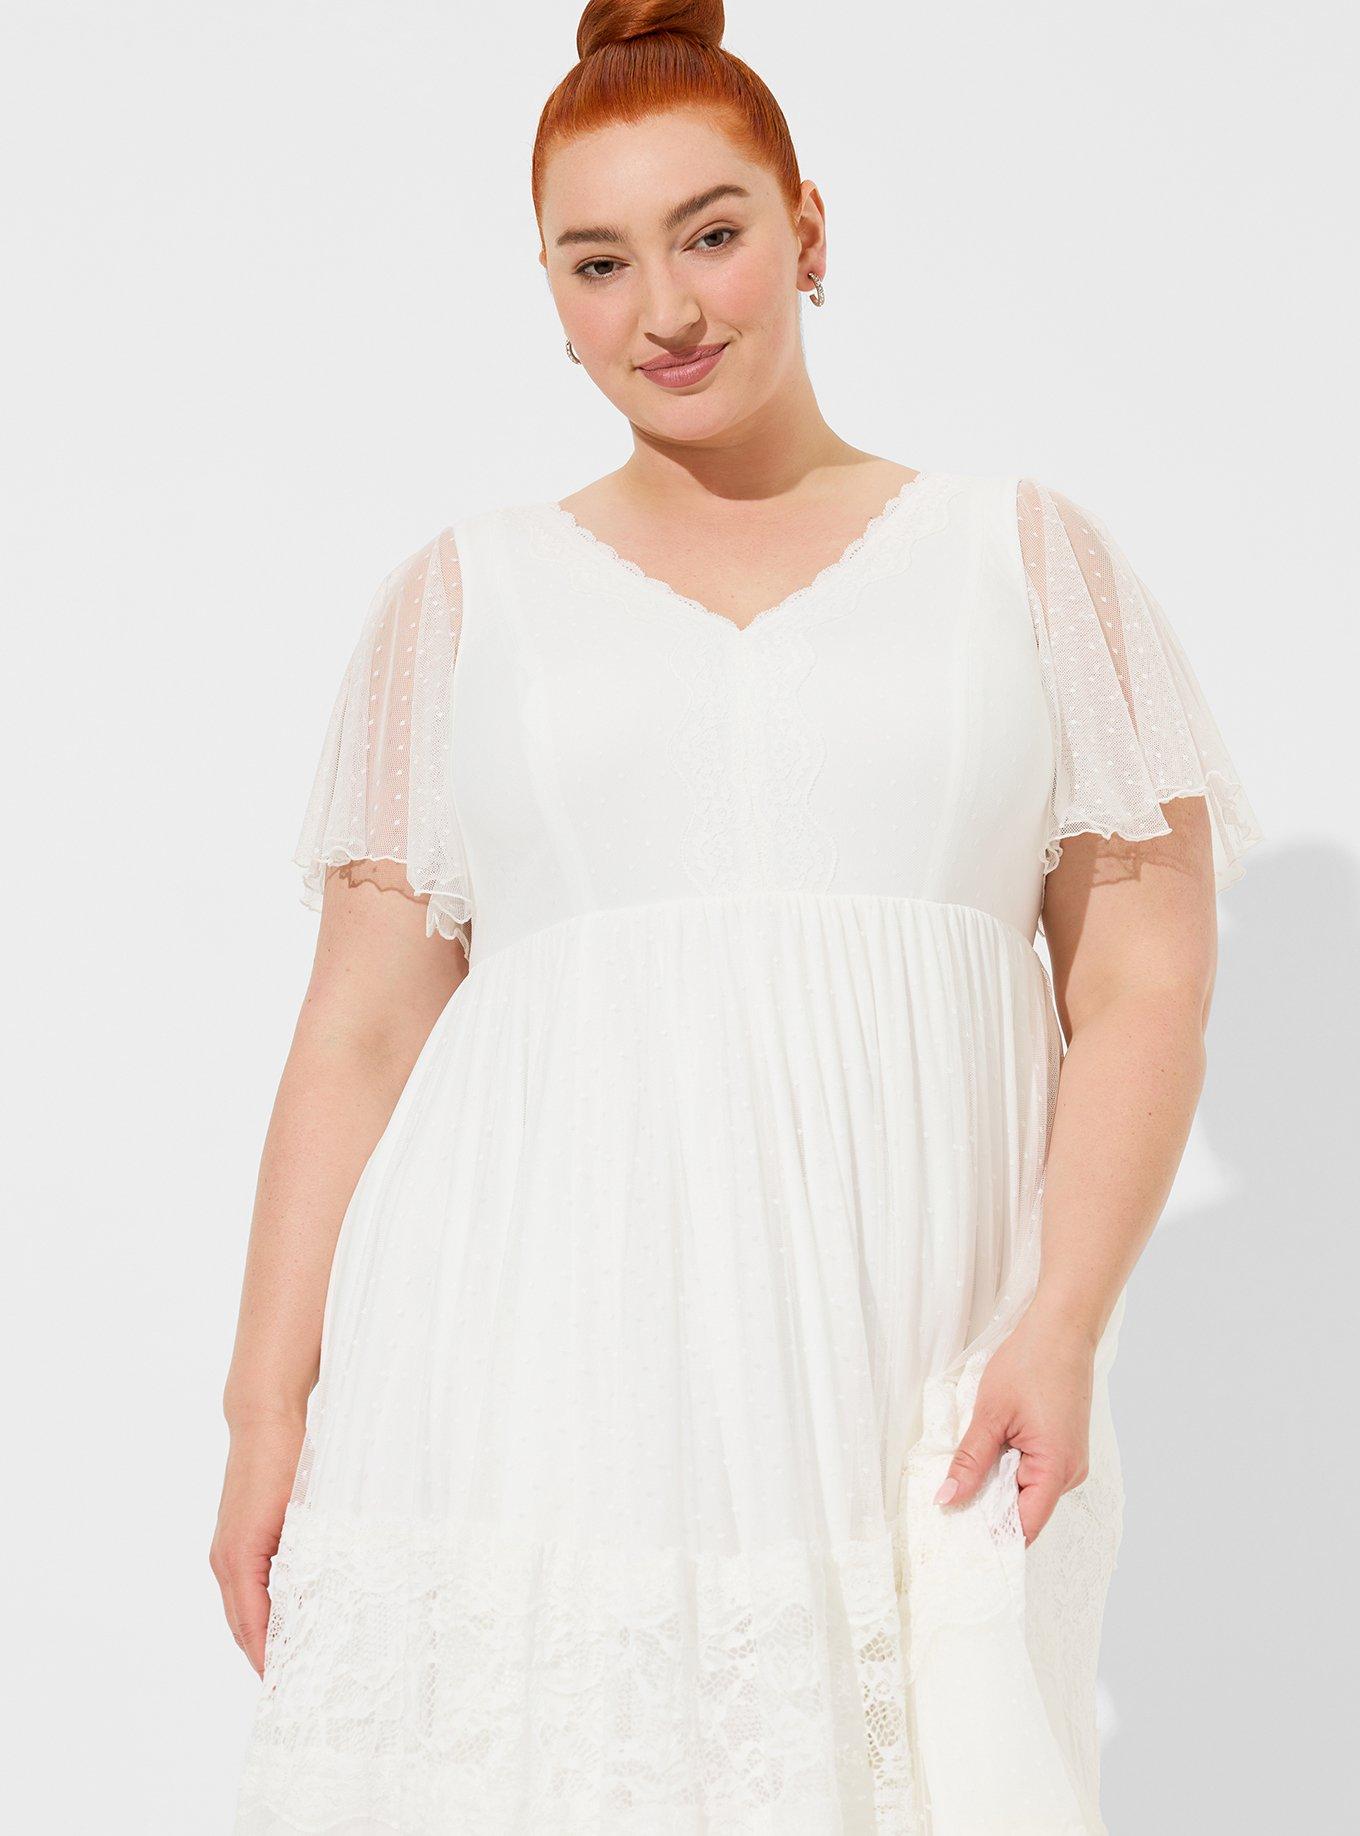 Ivory Plus Size Dresses for Women